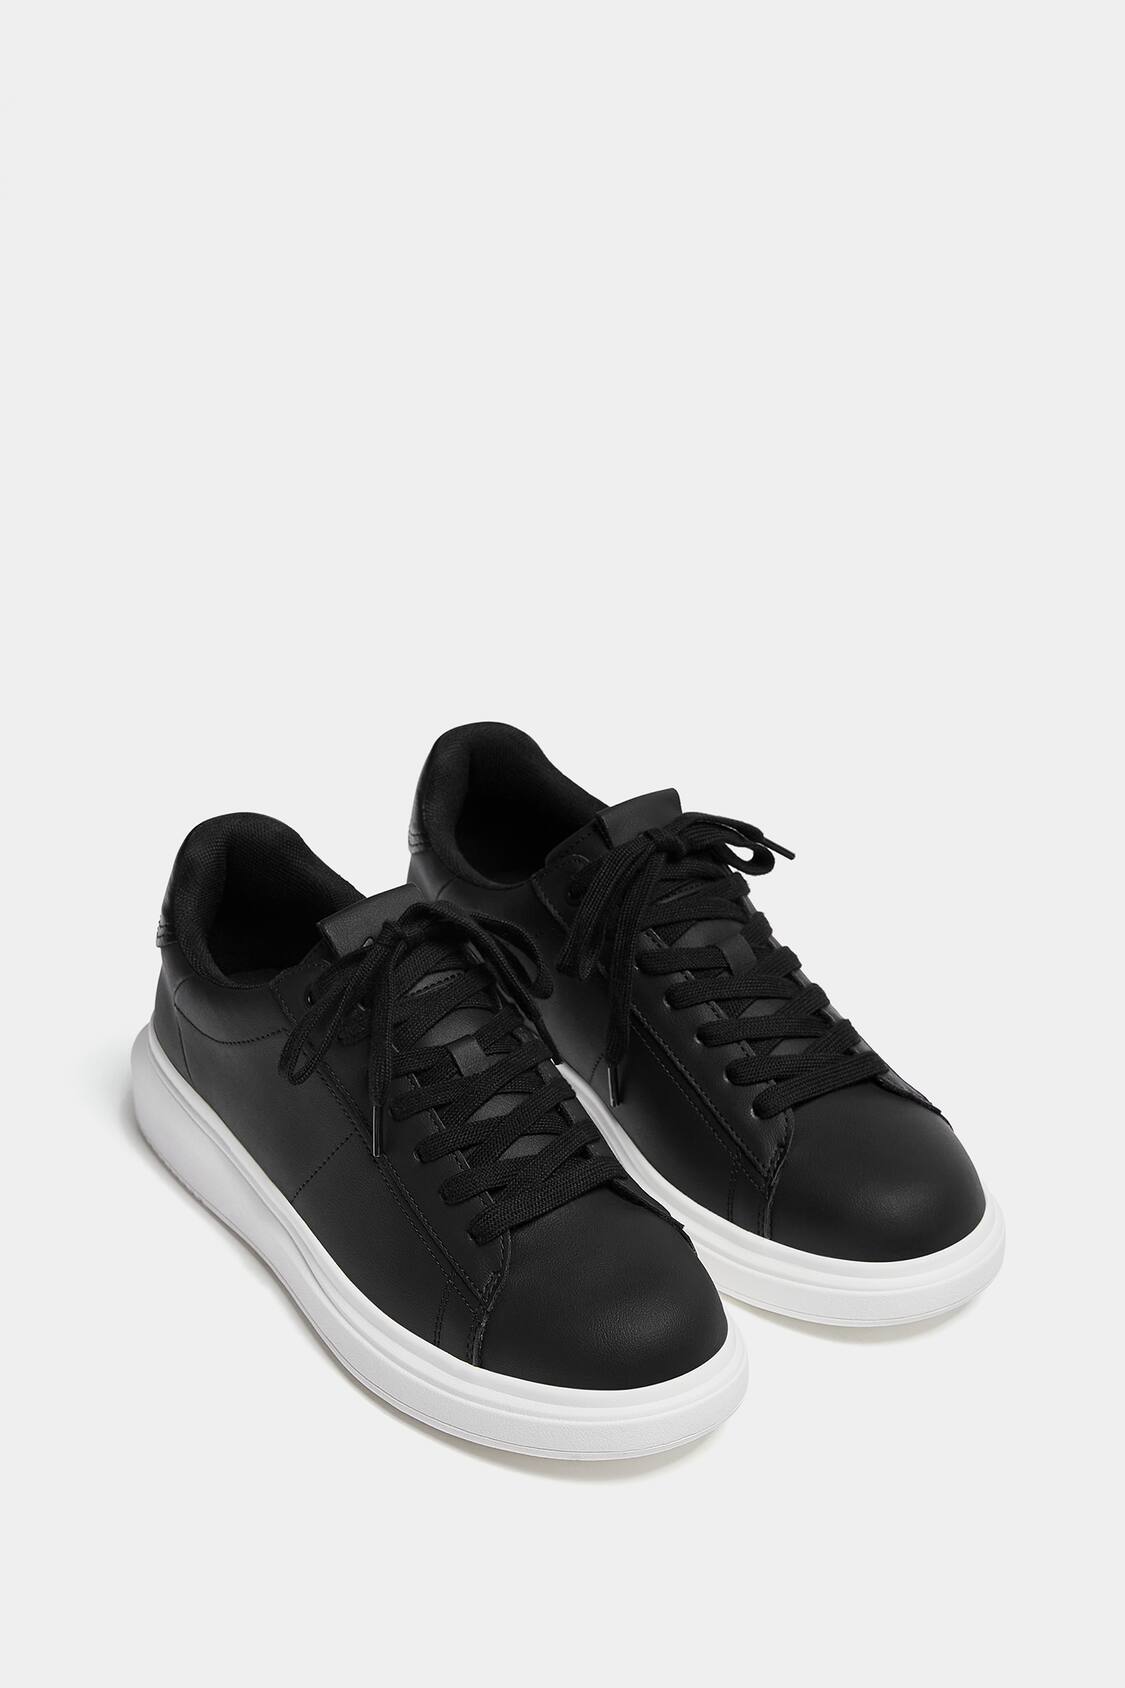 Pull&Bear Flatform Sneakers With Black Back Tab in White